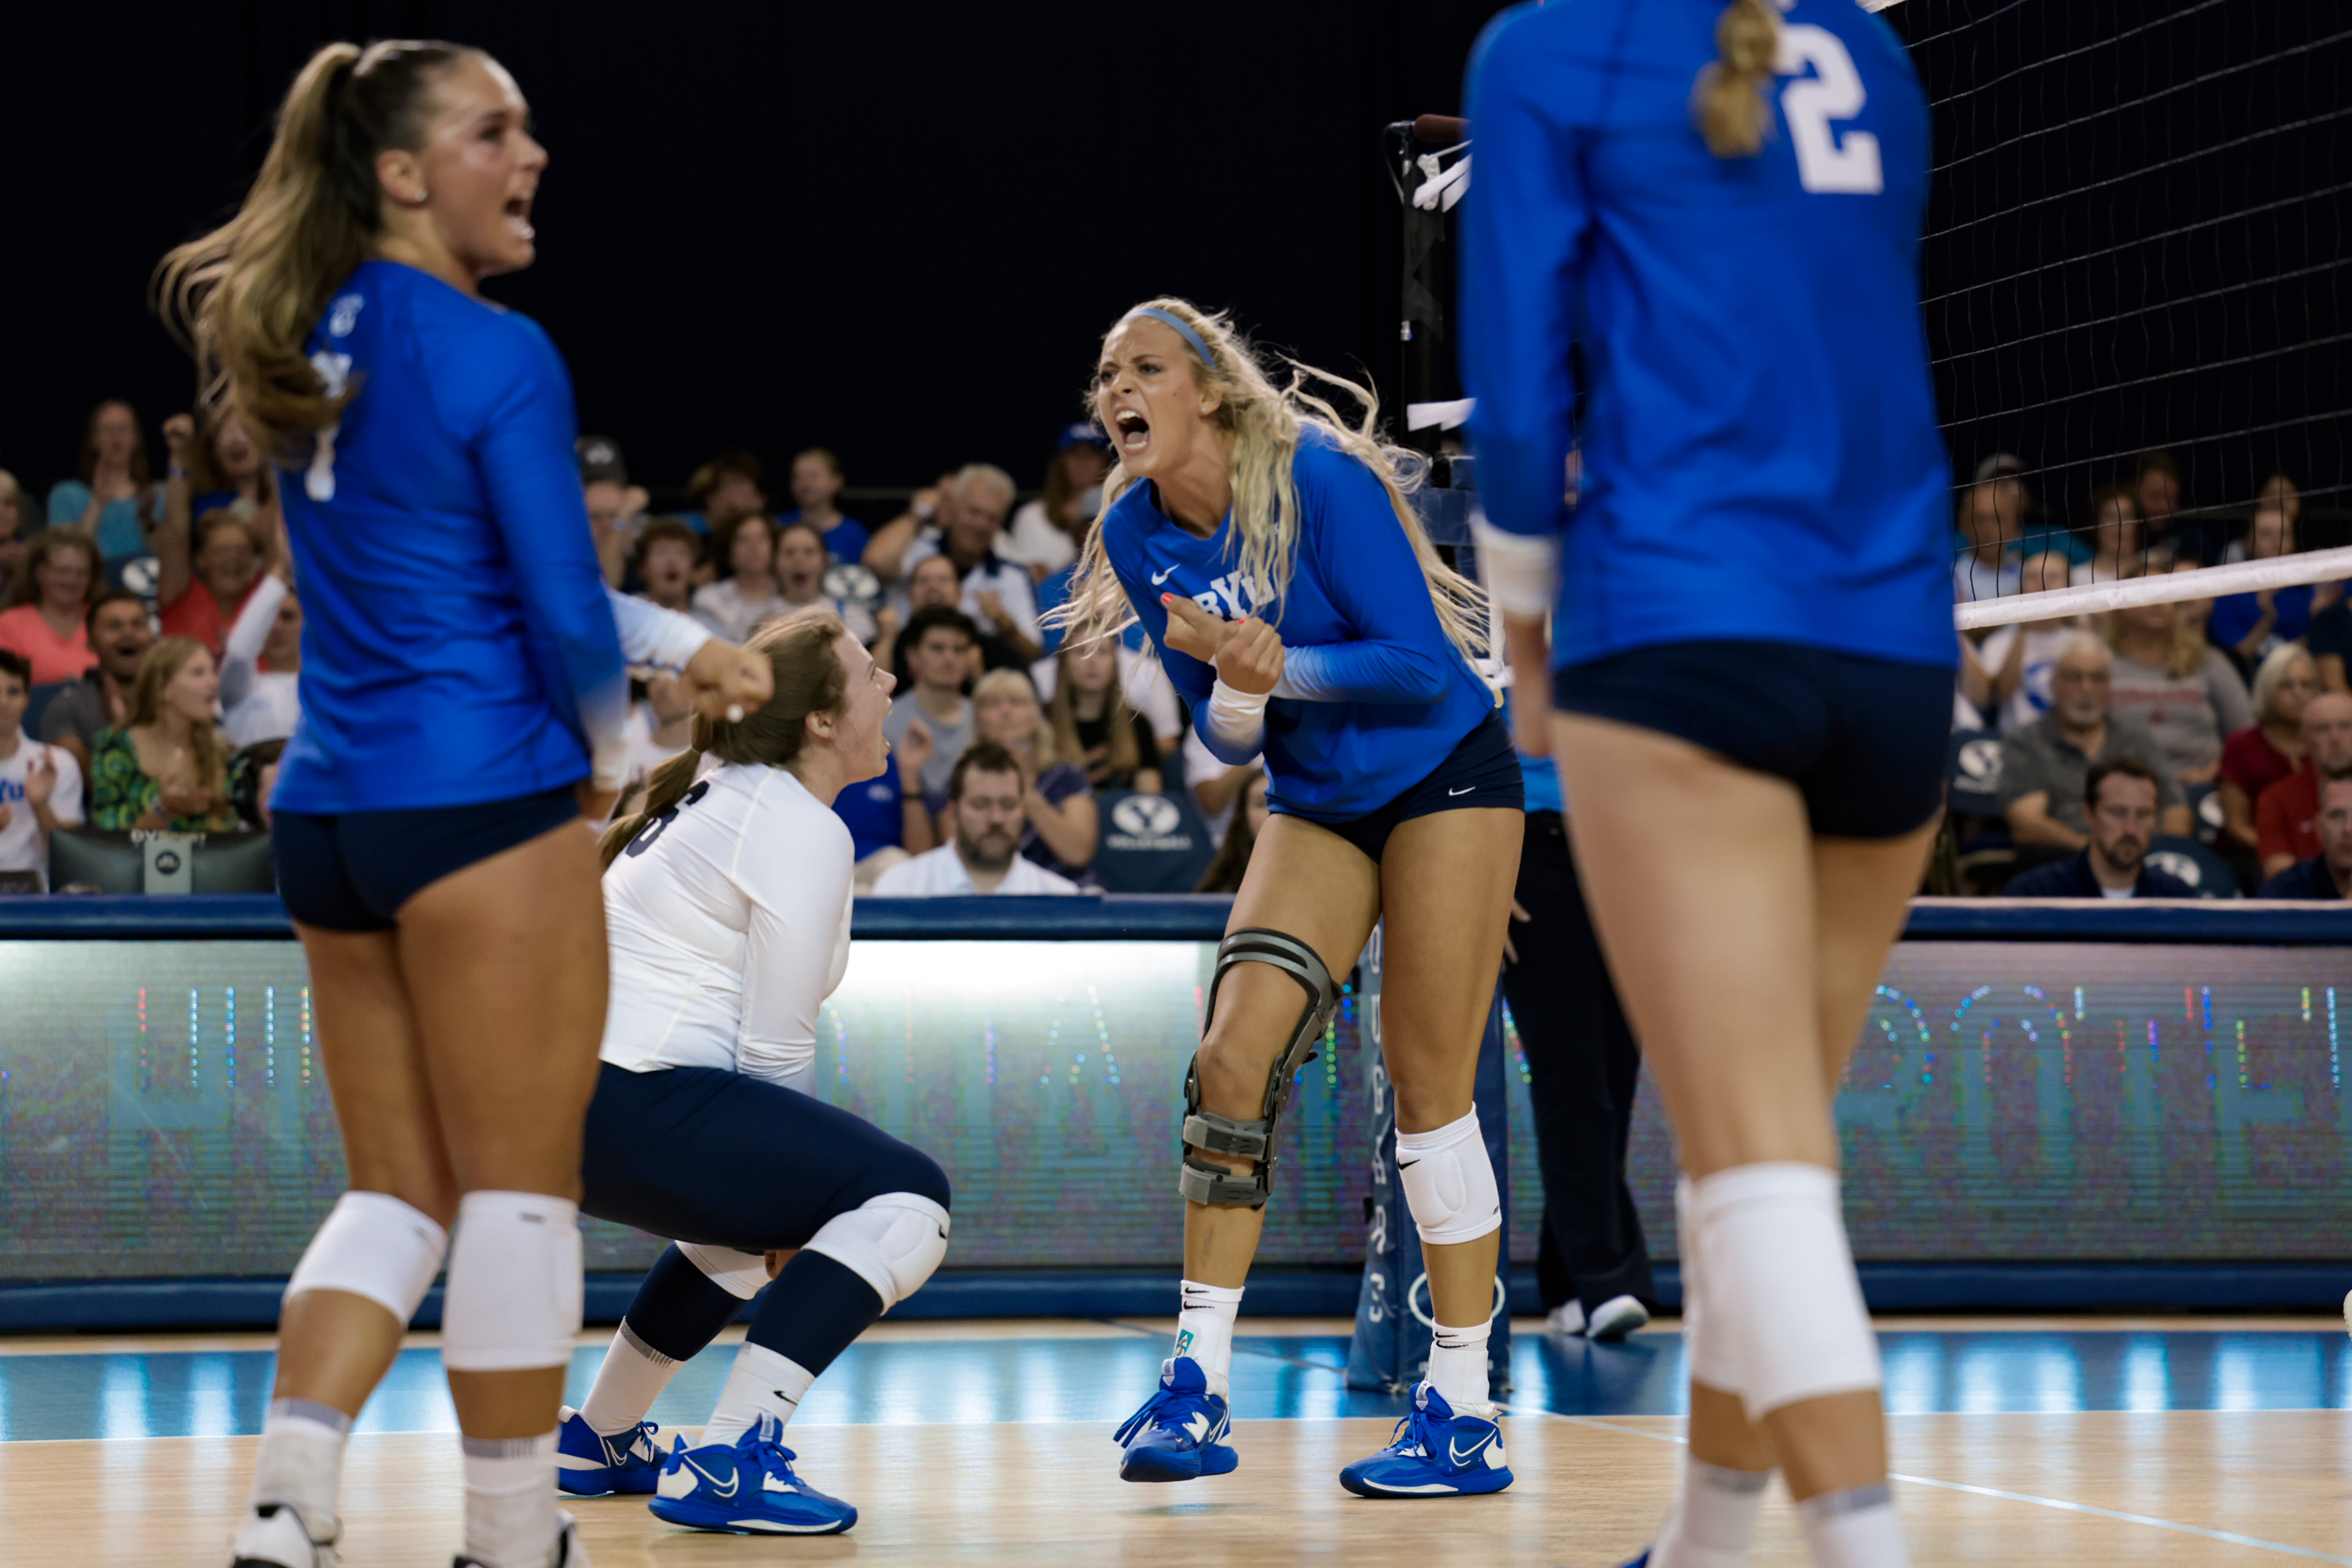 Eden Bower celebrates a kill during a three set sweep of Washington State at the Smith Fieldhouse Saturday night.